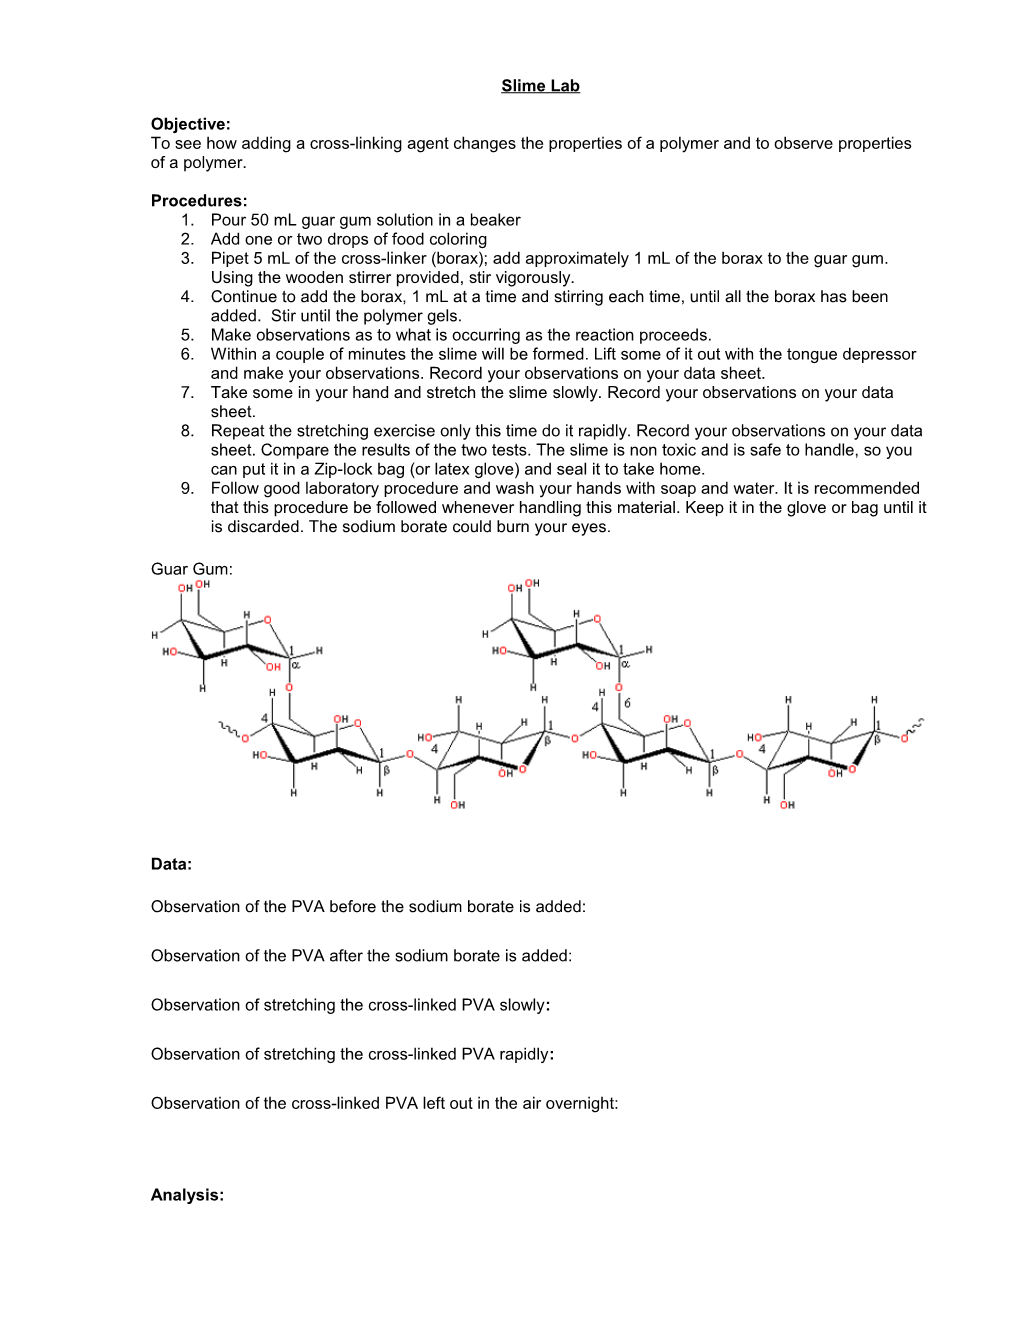 To See How Adding a Cross-Linking Agent Changes the Properties of a Polymer and to Observe